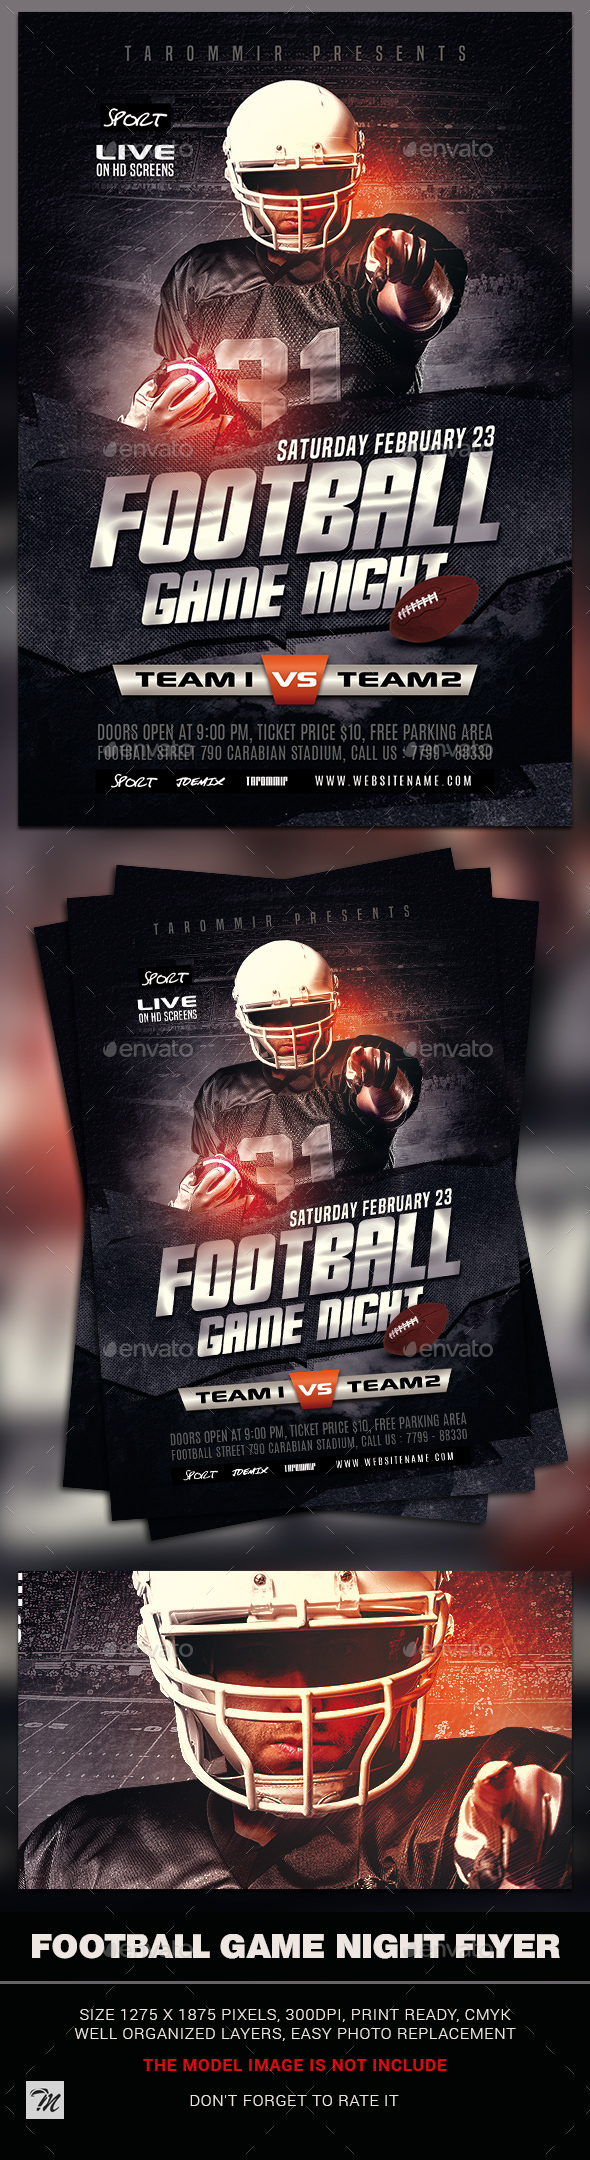 Football Game Night Flyer Template  Flyer, Flyer template, Flyer design  templates